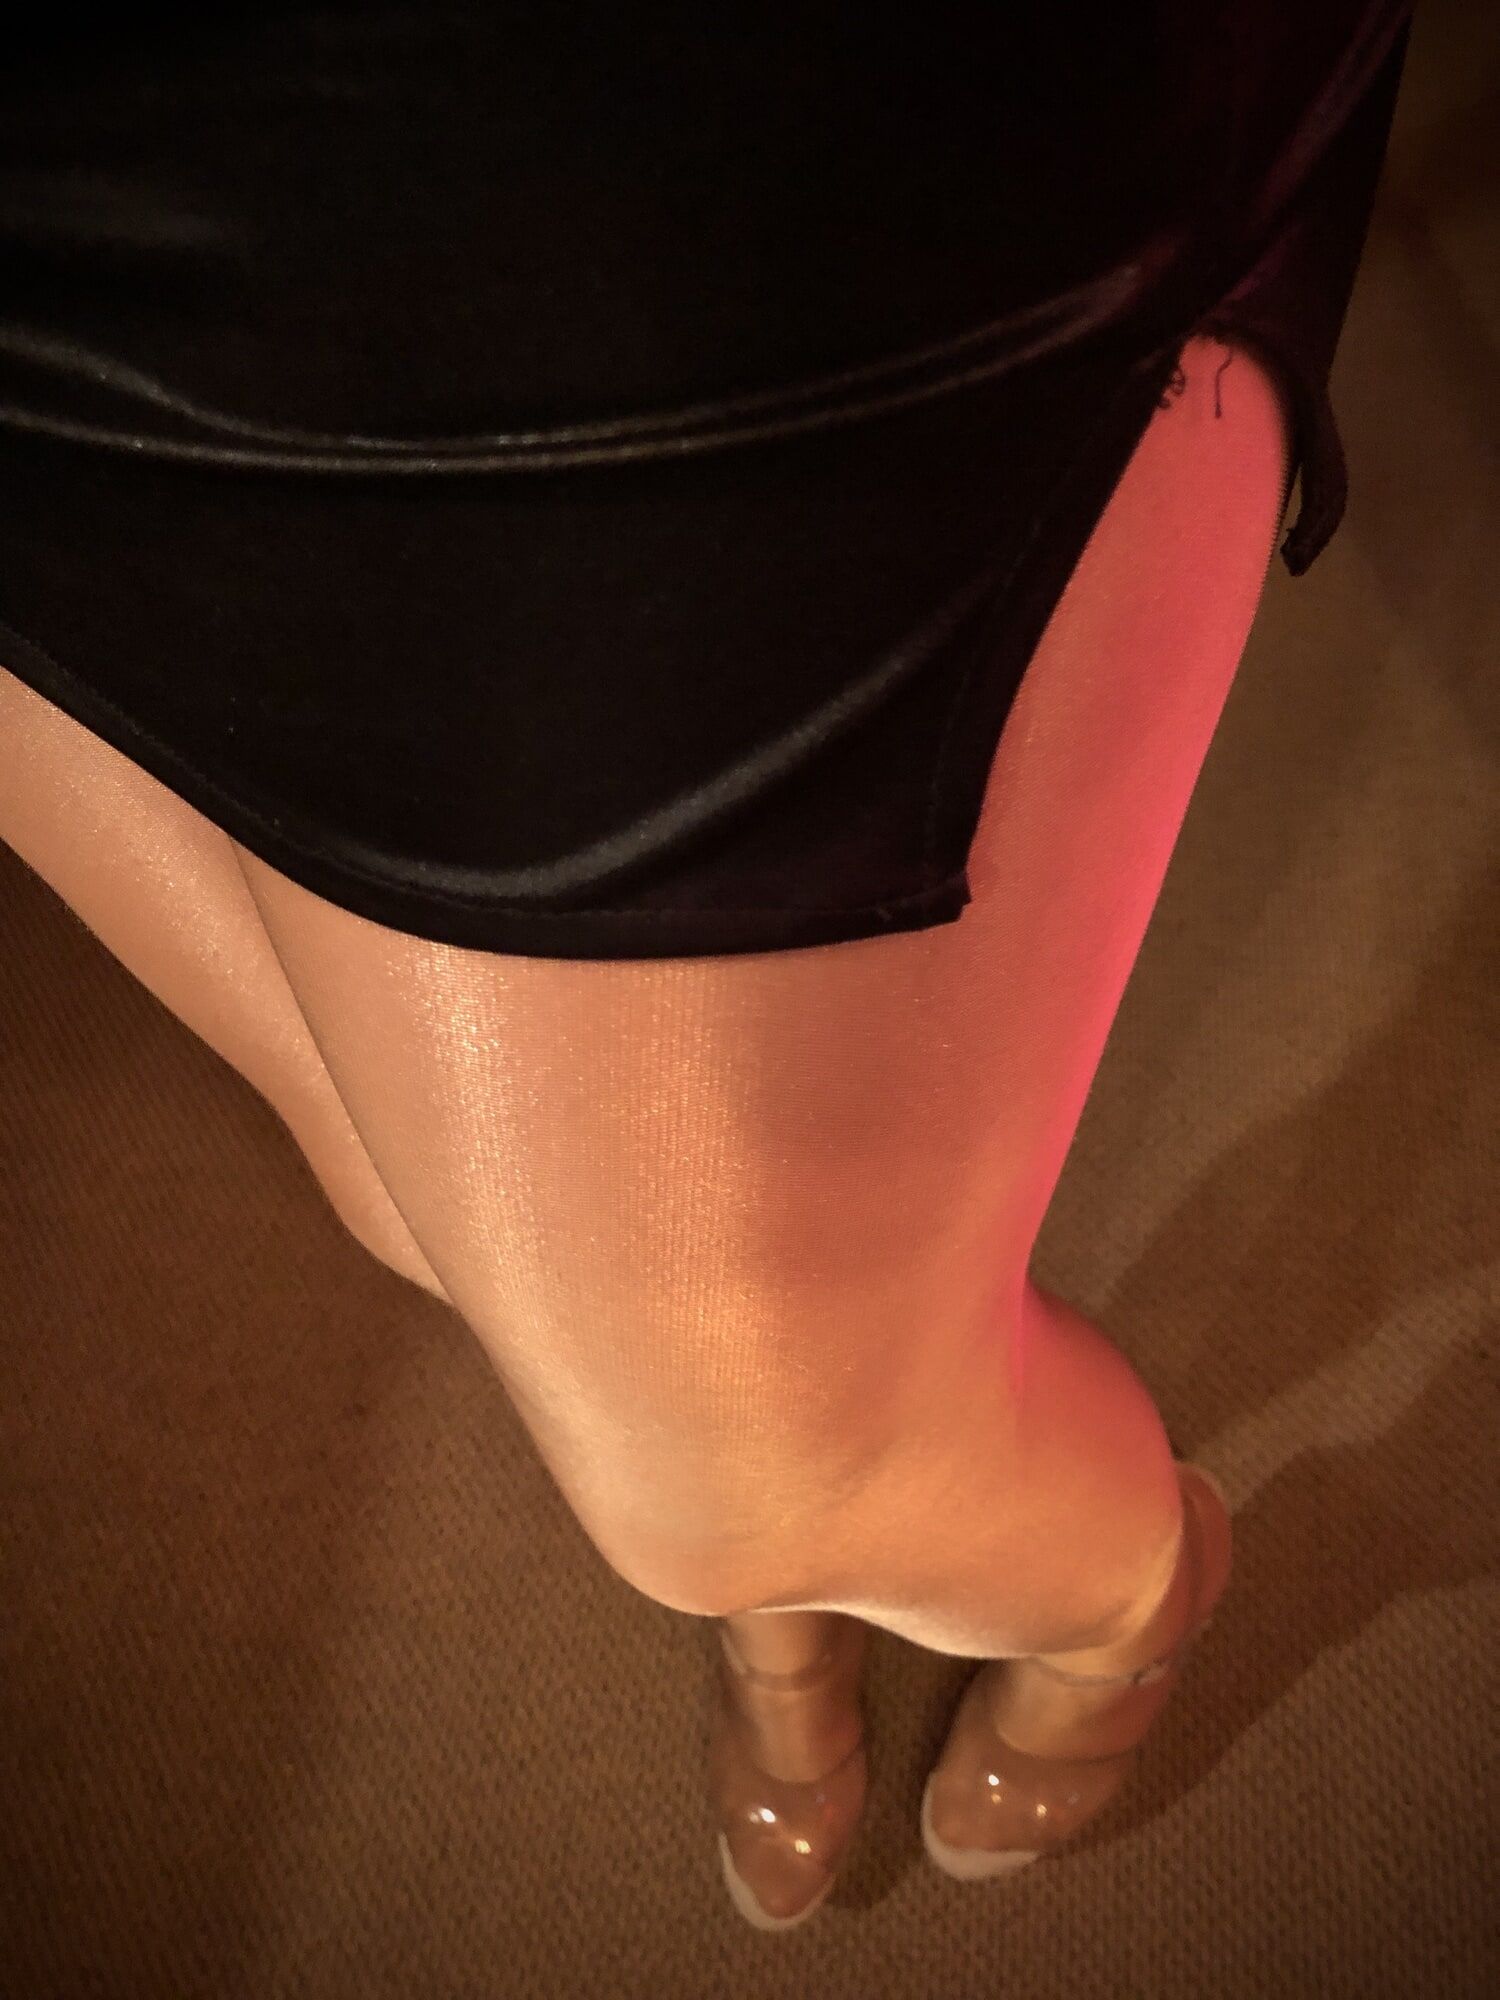 My legs looks so hot on pantyhose and high heels!